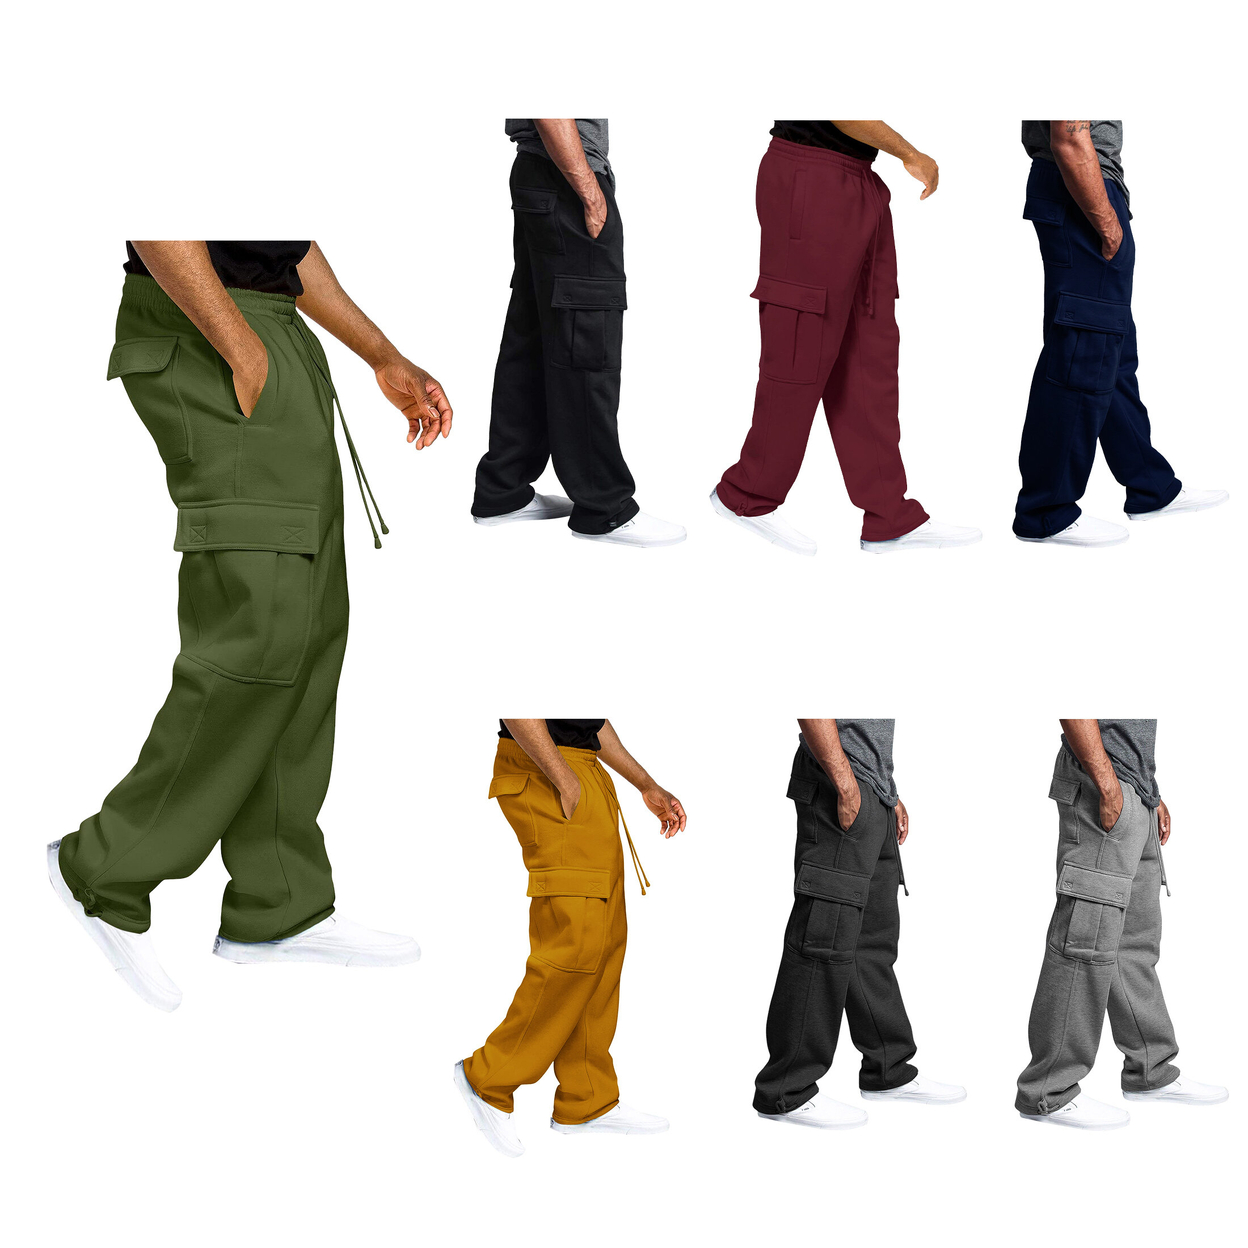 Men's Soft Casual Solid Fleece Lined Cargo Jogger Sweatpants With Pockets - Charcoal, Xx-large